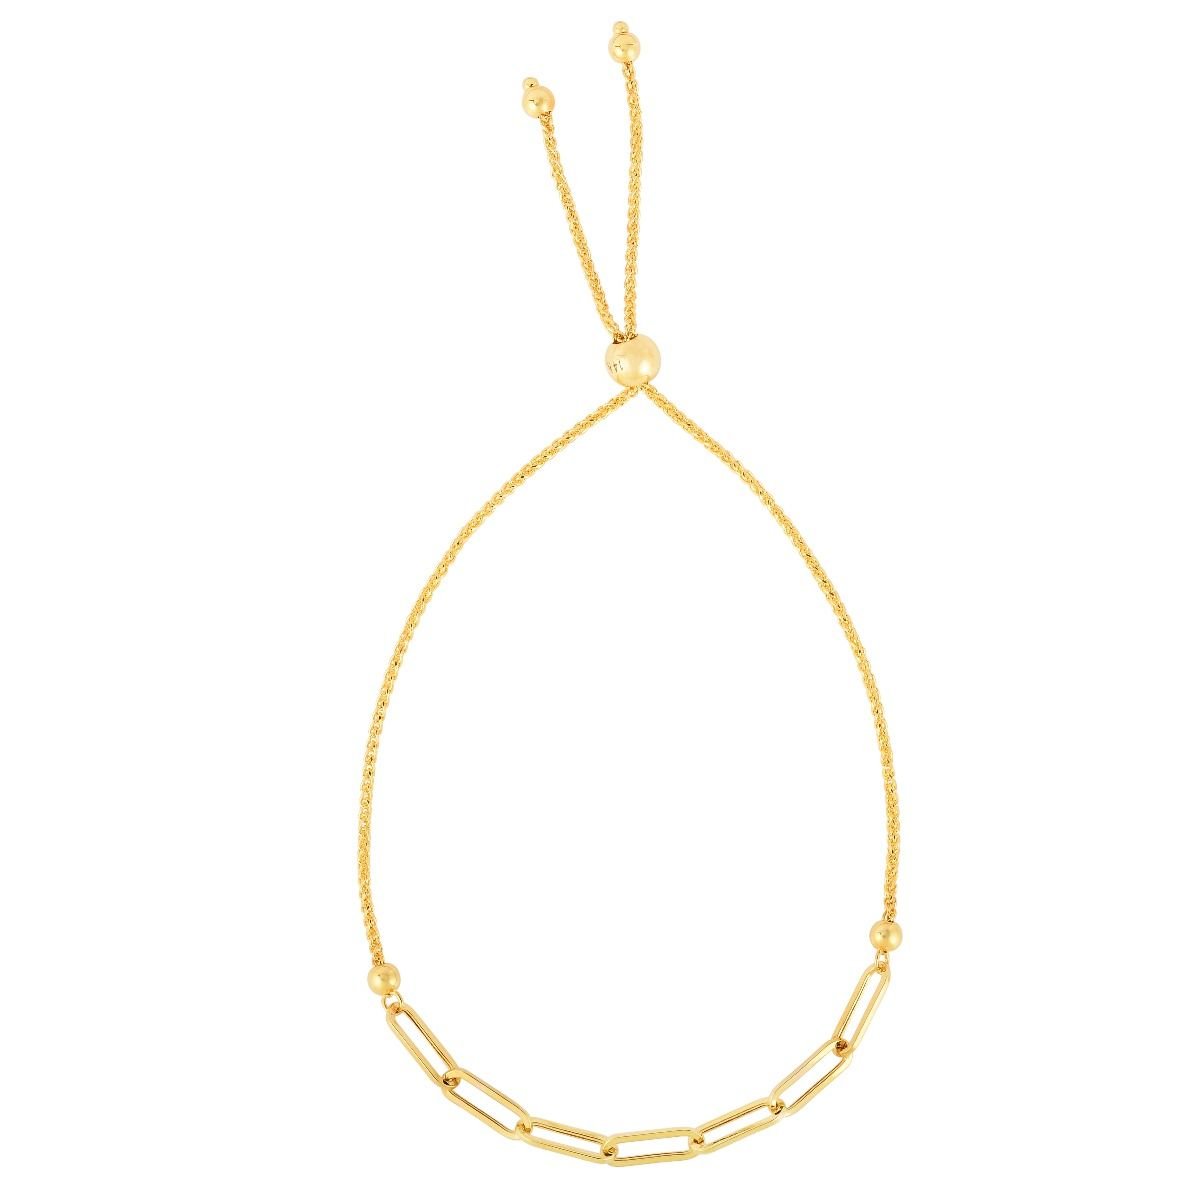 14K Yellow Gold Paper Clip Chain Adjustable Pull Bolo Bracelet